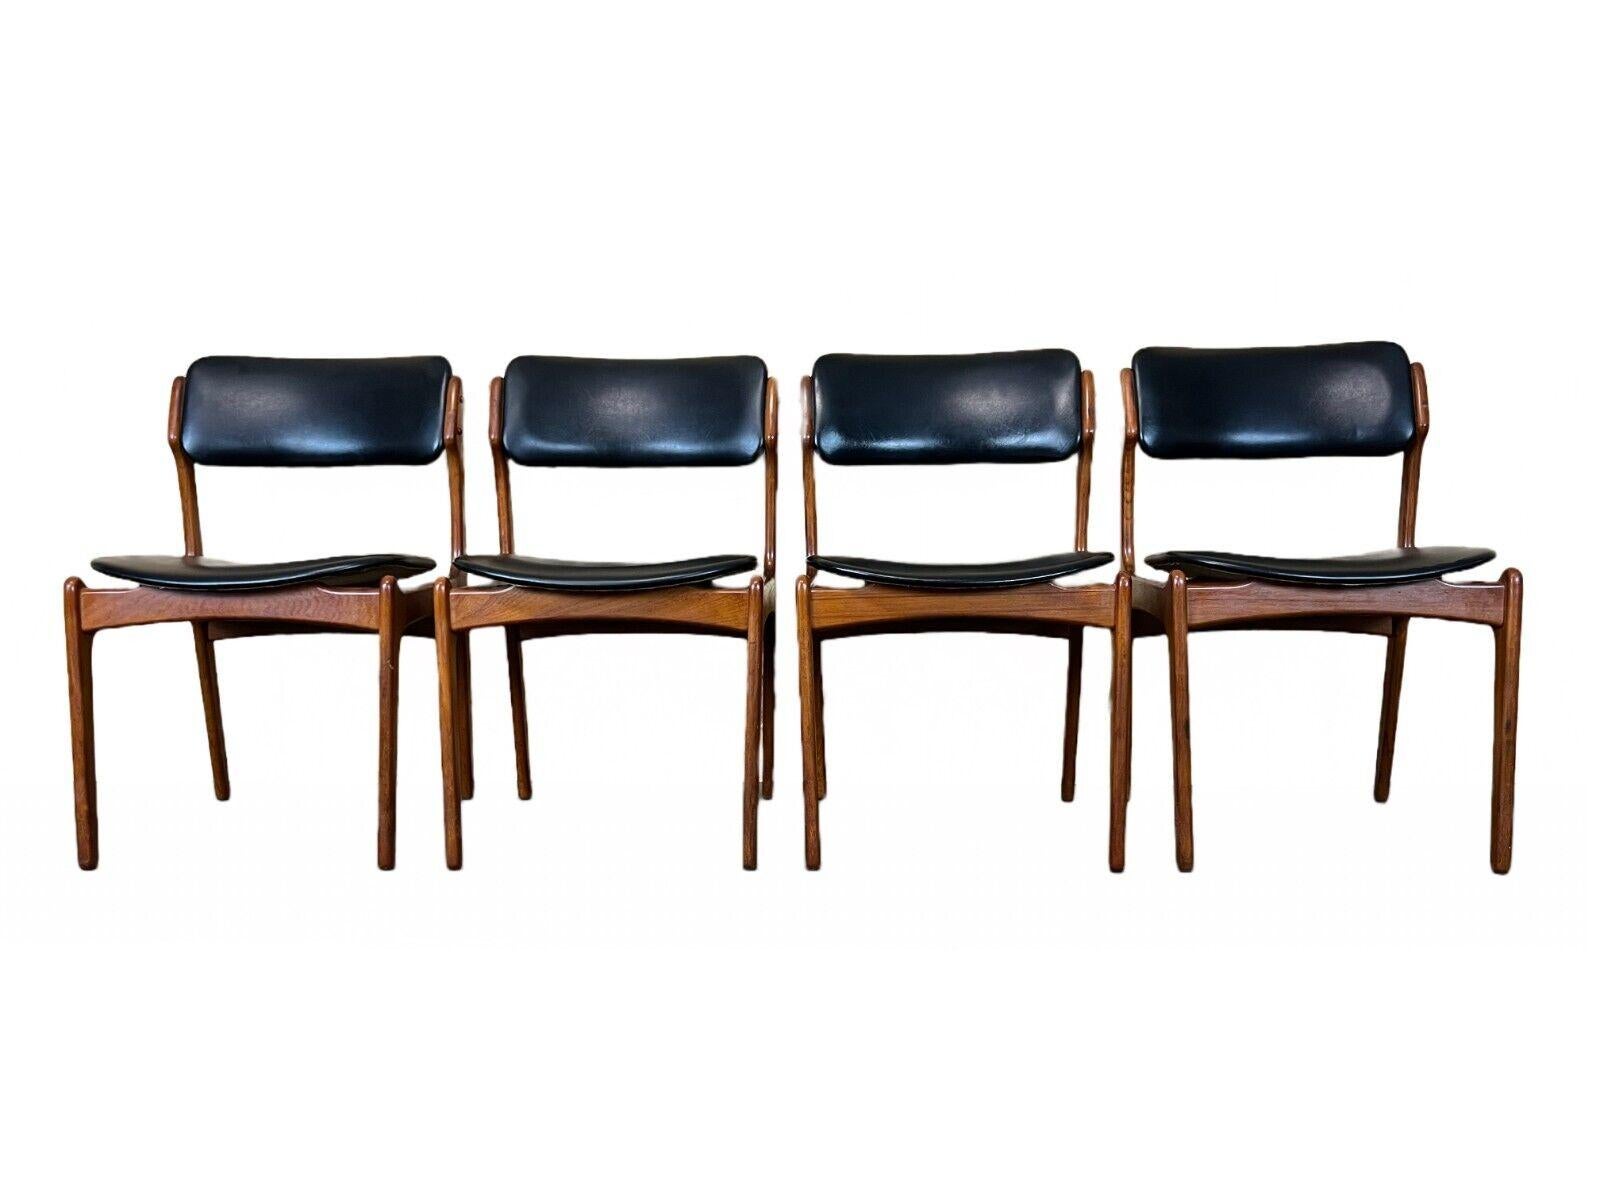 4x 60s 70s chair chairs teak dining chair Erik Buch O.D. Møbler Denmark

Object: 4x chair

Manufacturer: O.D. furniture

Condition: good - vintage

Age: around 1960-1970

Dimensions:

Width = 48cm
Depth = 54.5cm
Height = 80cm
Seat